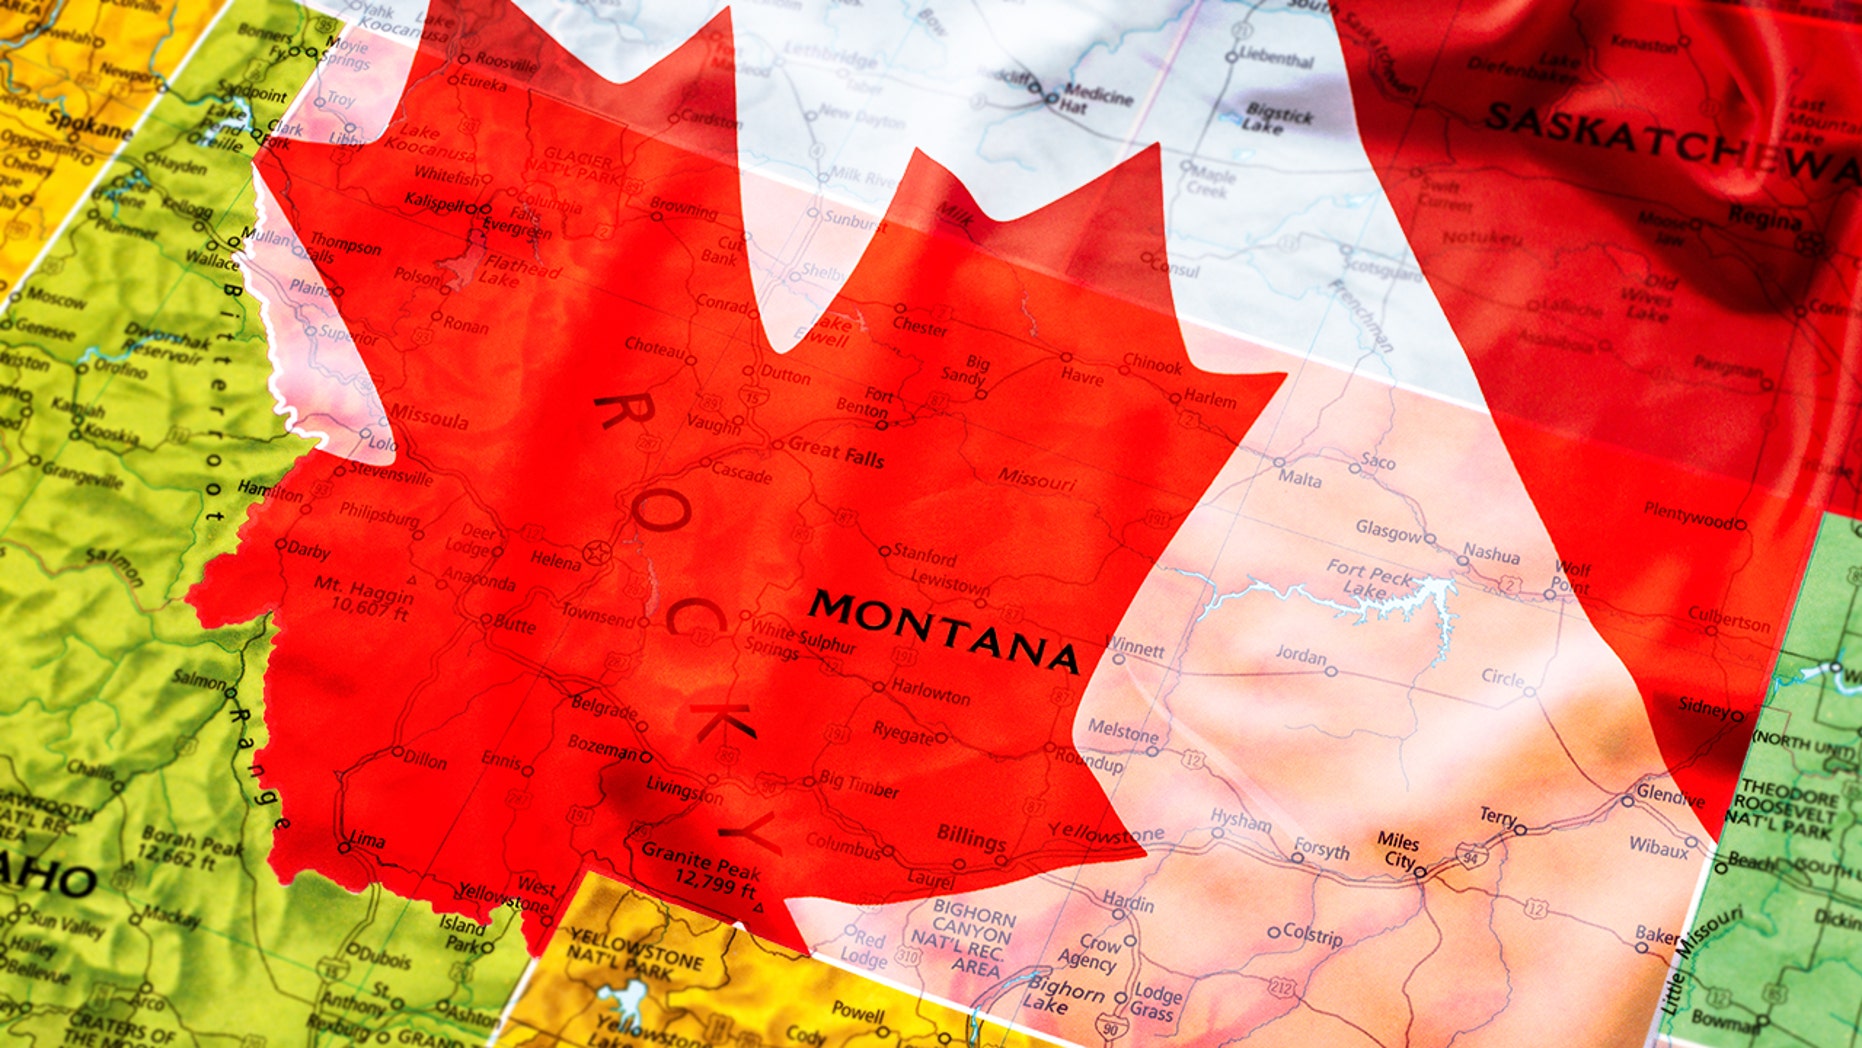 Montana in Canada for a trillion dollars?